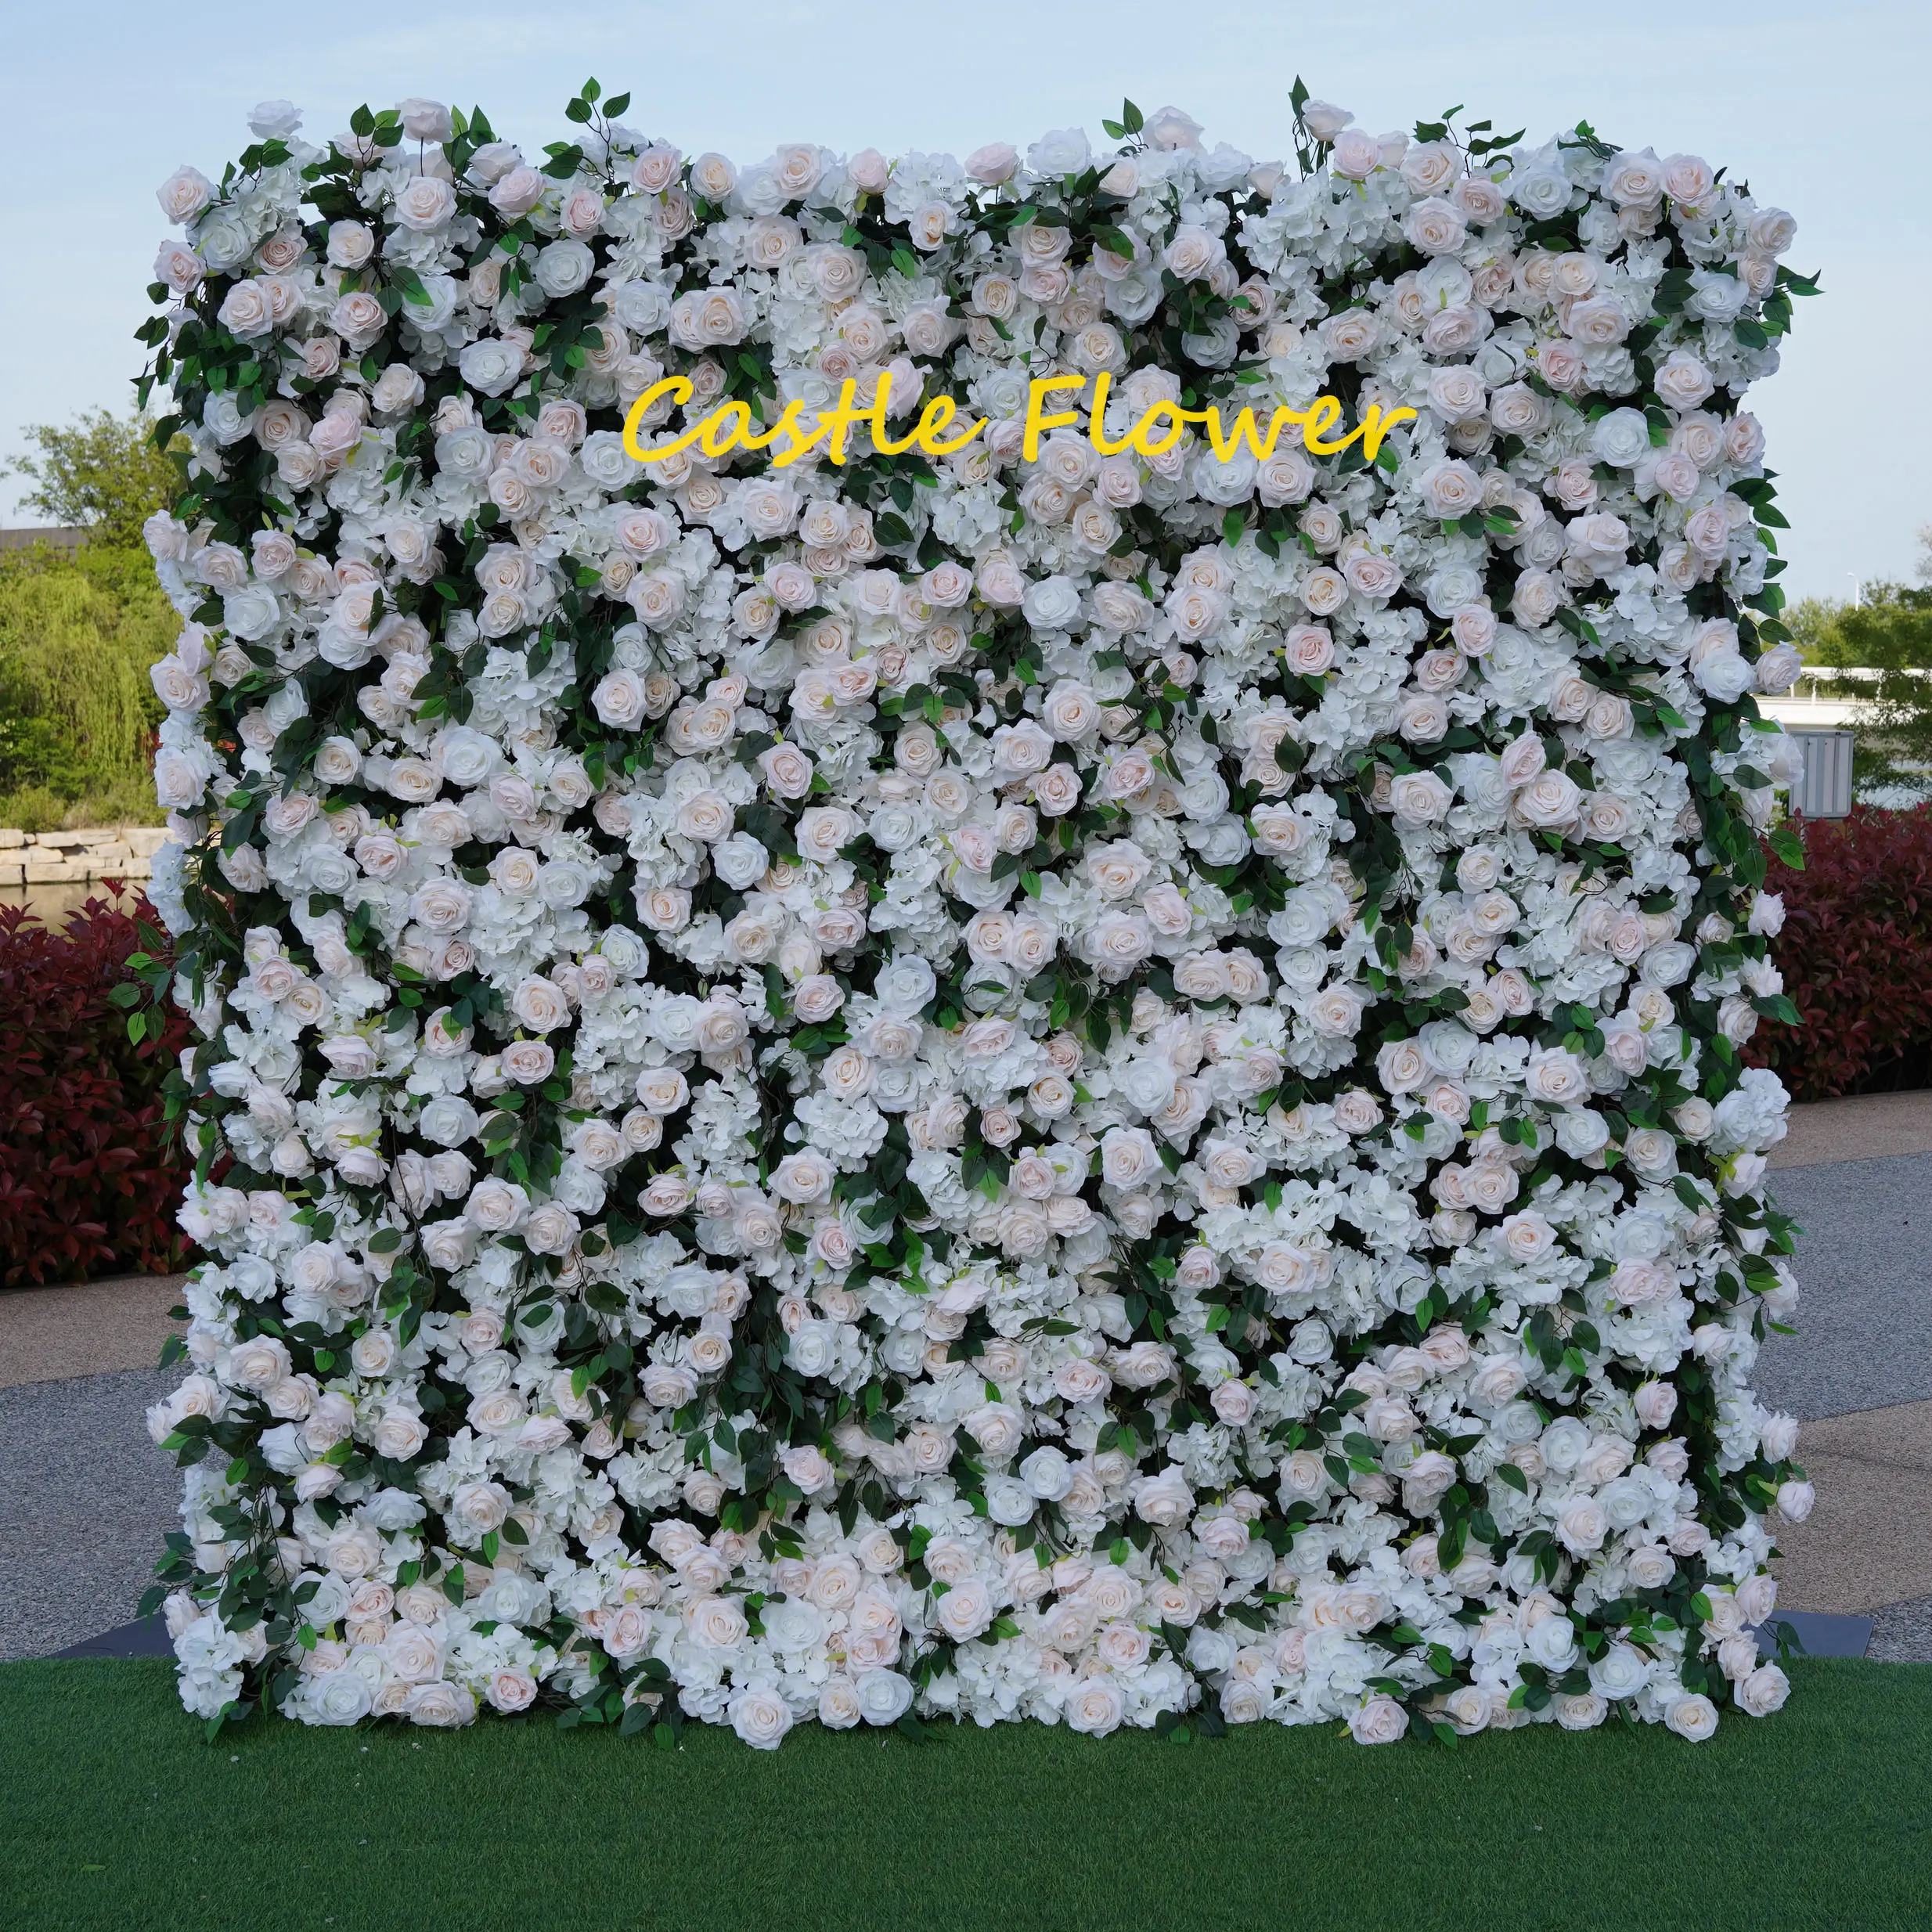 O-W028 Factory Manufacturer White Flower Wall Decor Wedding Events Props Roll Up Artificial Flower Wall Backdrop 8ft x 8ft